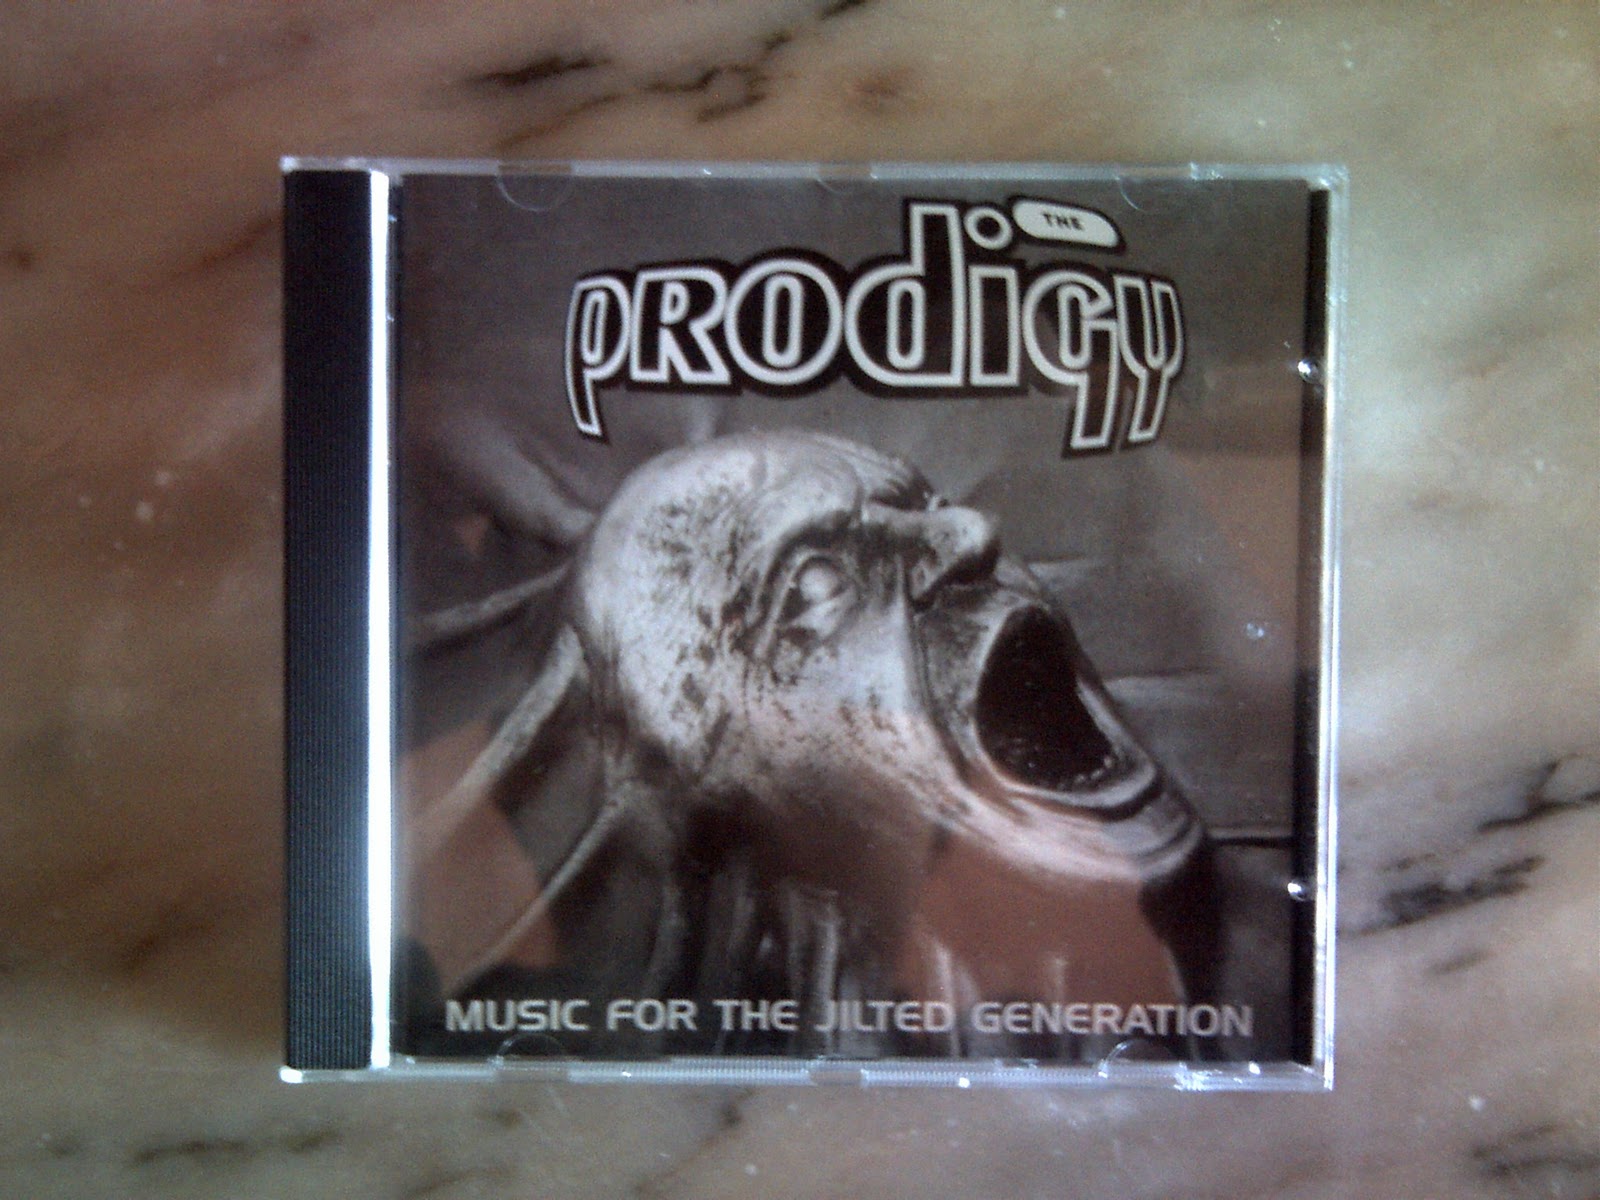 Music for the jilted generation. Prodigy jilted Generation. Music for the jilted Generation the Prodigy. Prodigy альбом Music for the jilted Generation. 1994 - Music for the jilted Generation.